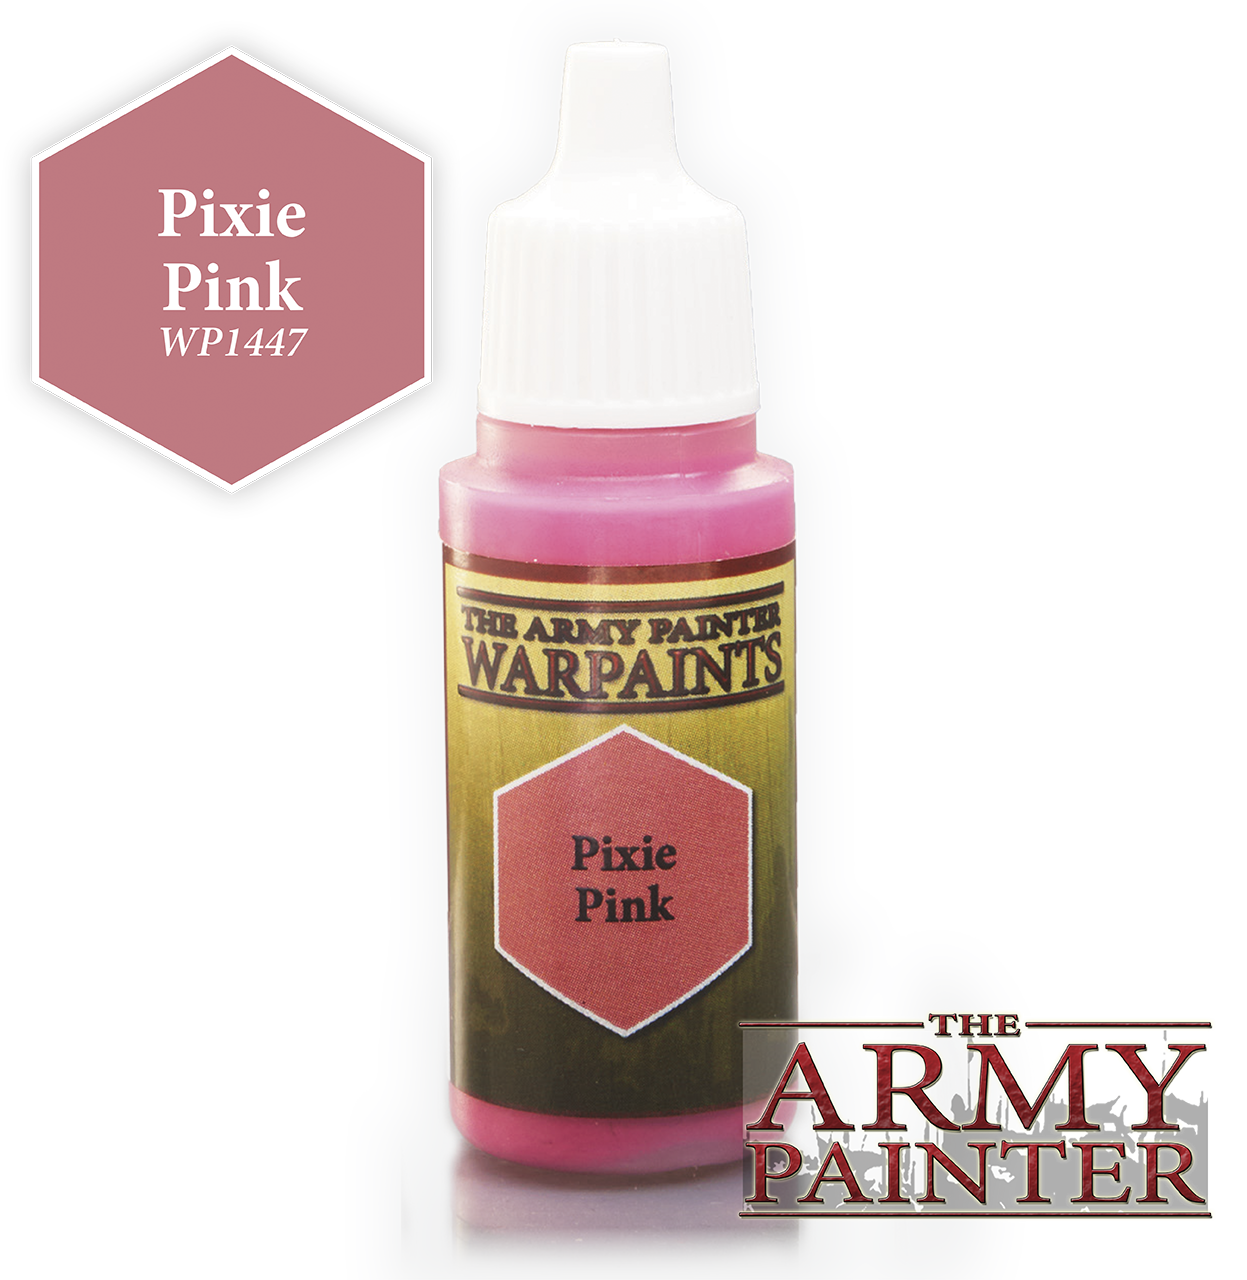 The ARMY PAINTER: Acrylics Warpaint - Pixie Pink | Tacoma Games